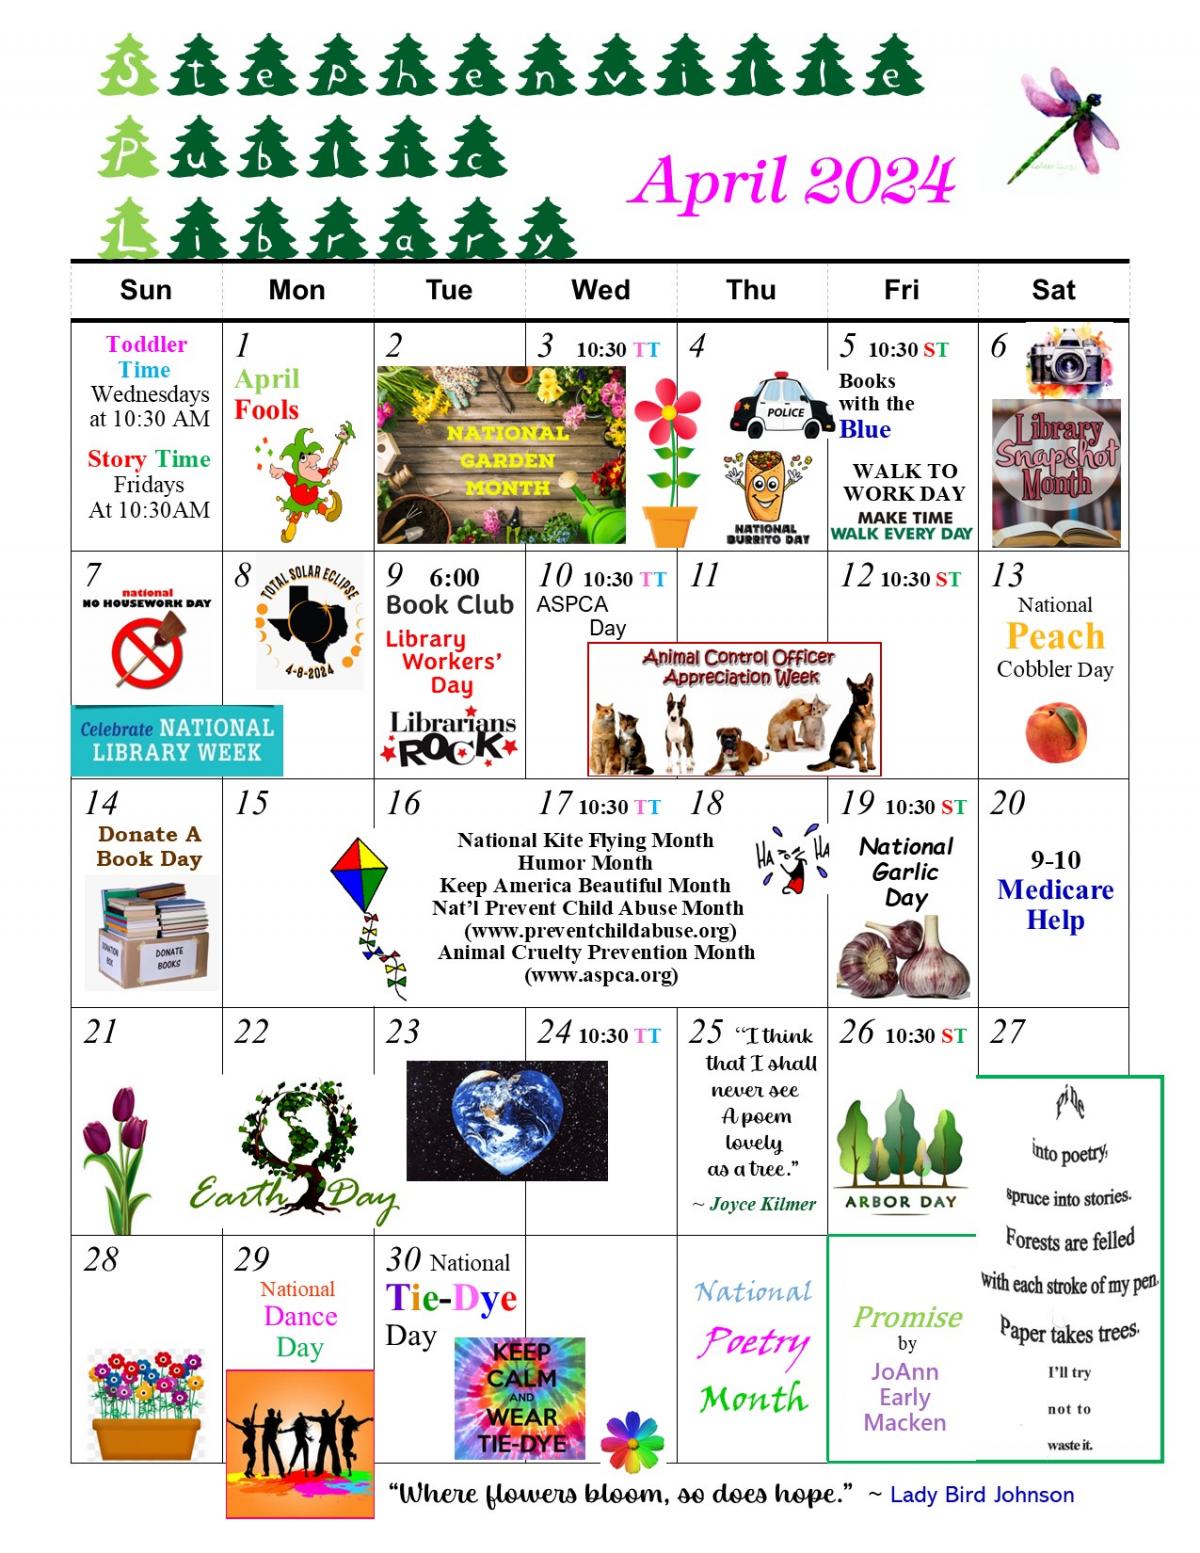 Calendar for the month of April